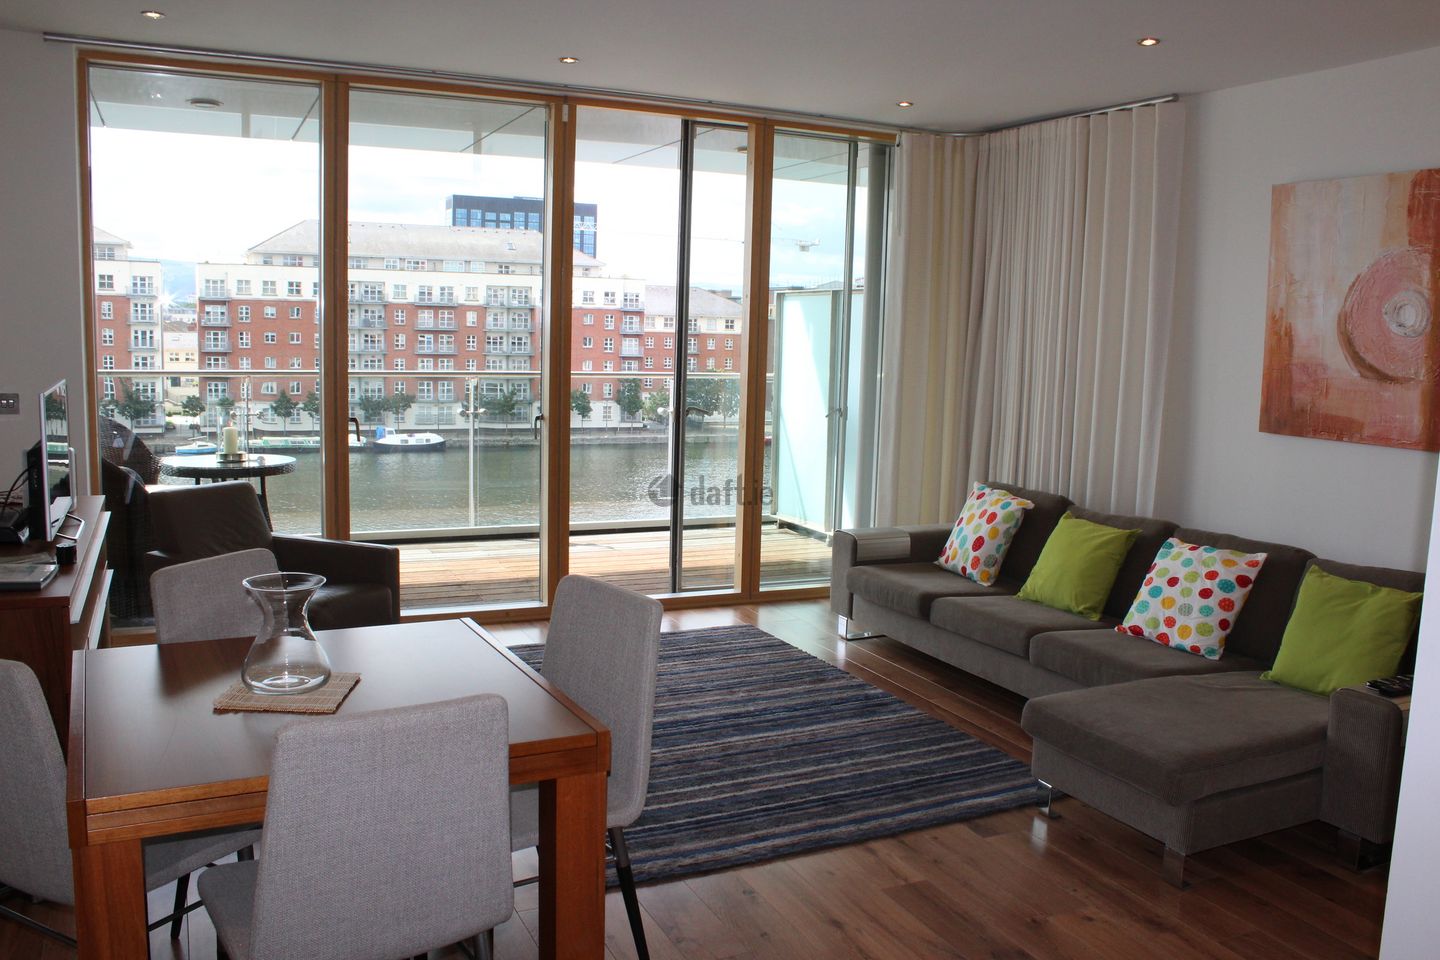 The Waterfront, Hanover Quay, Grand Canal Dock, Dublin 2